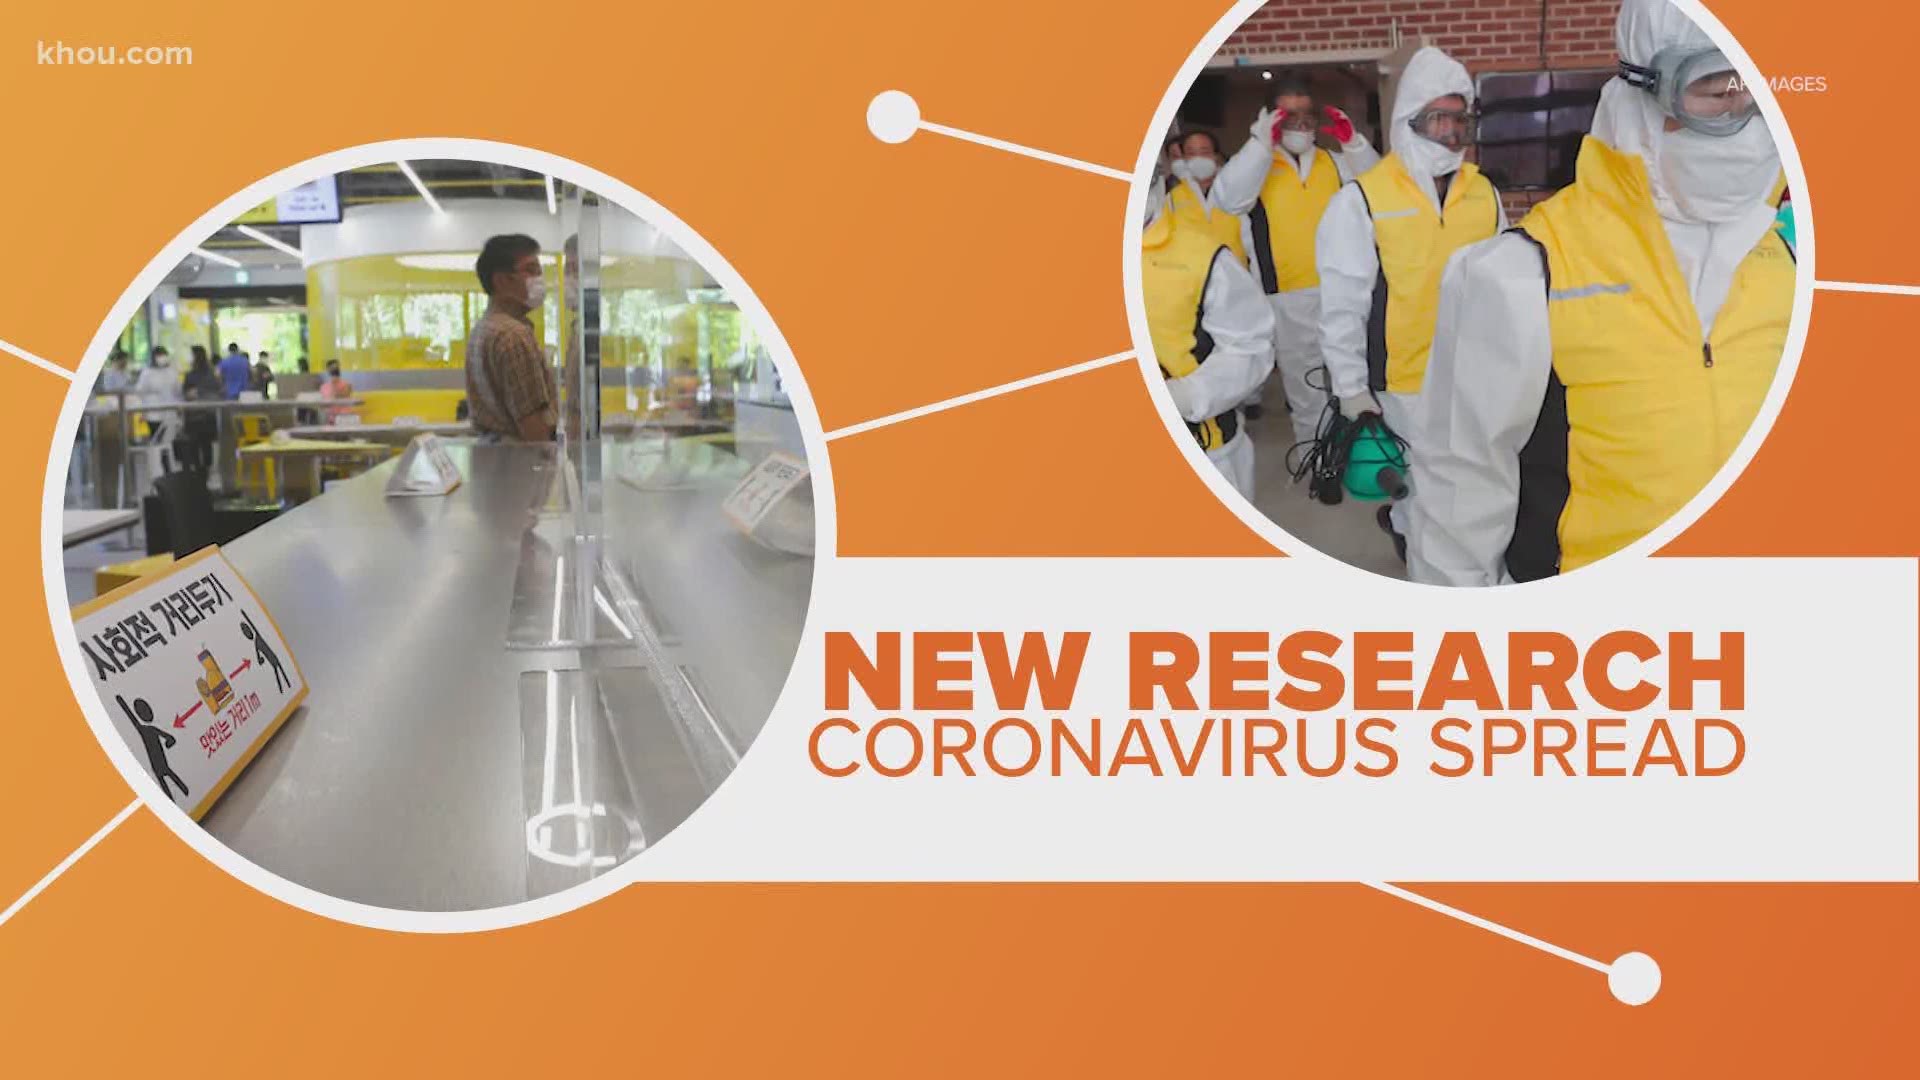 New research shows just how easily coronavirus can spread indoors and the results are an important warning. Let’s connect the dots.